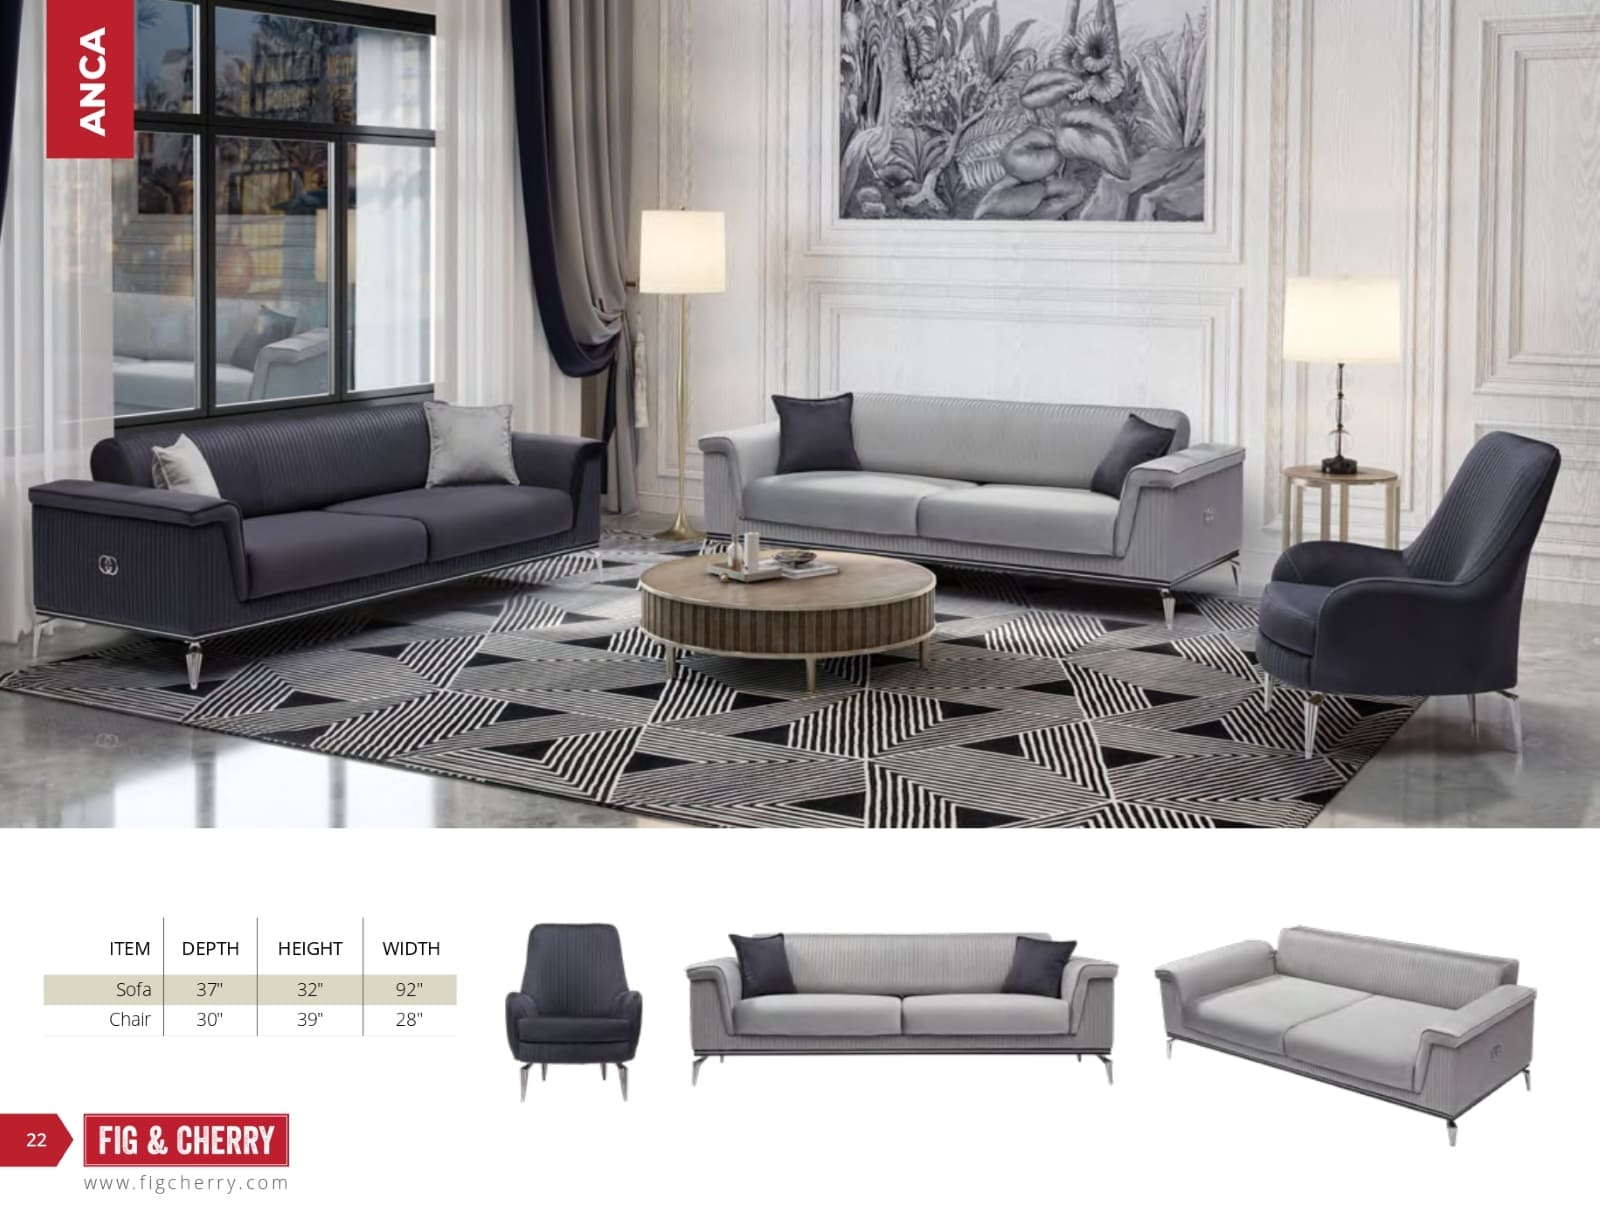 Fig & Cherry Indoor Collection (Sofas and Sectionals) Catalog (22)